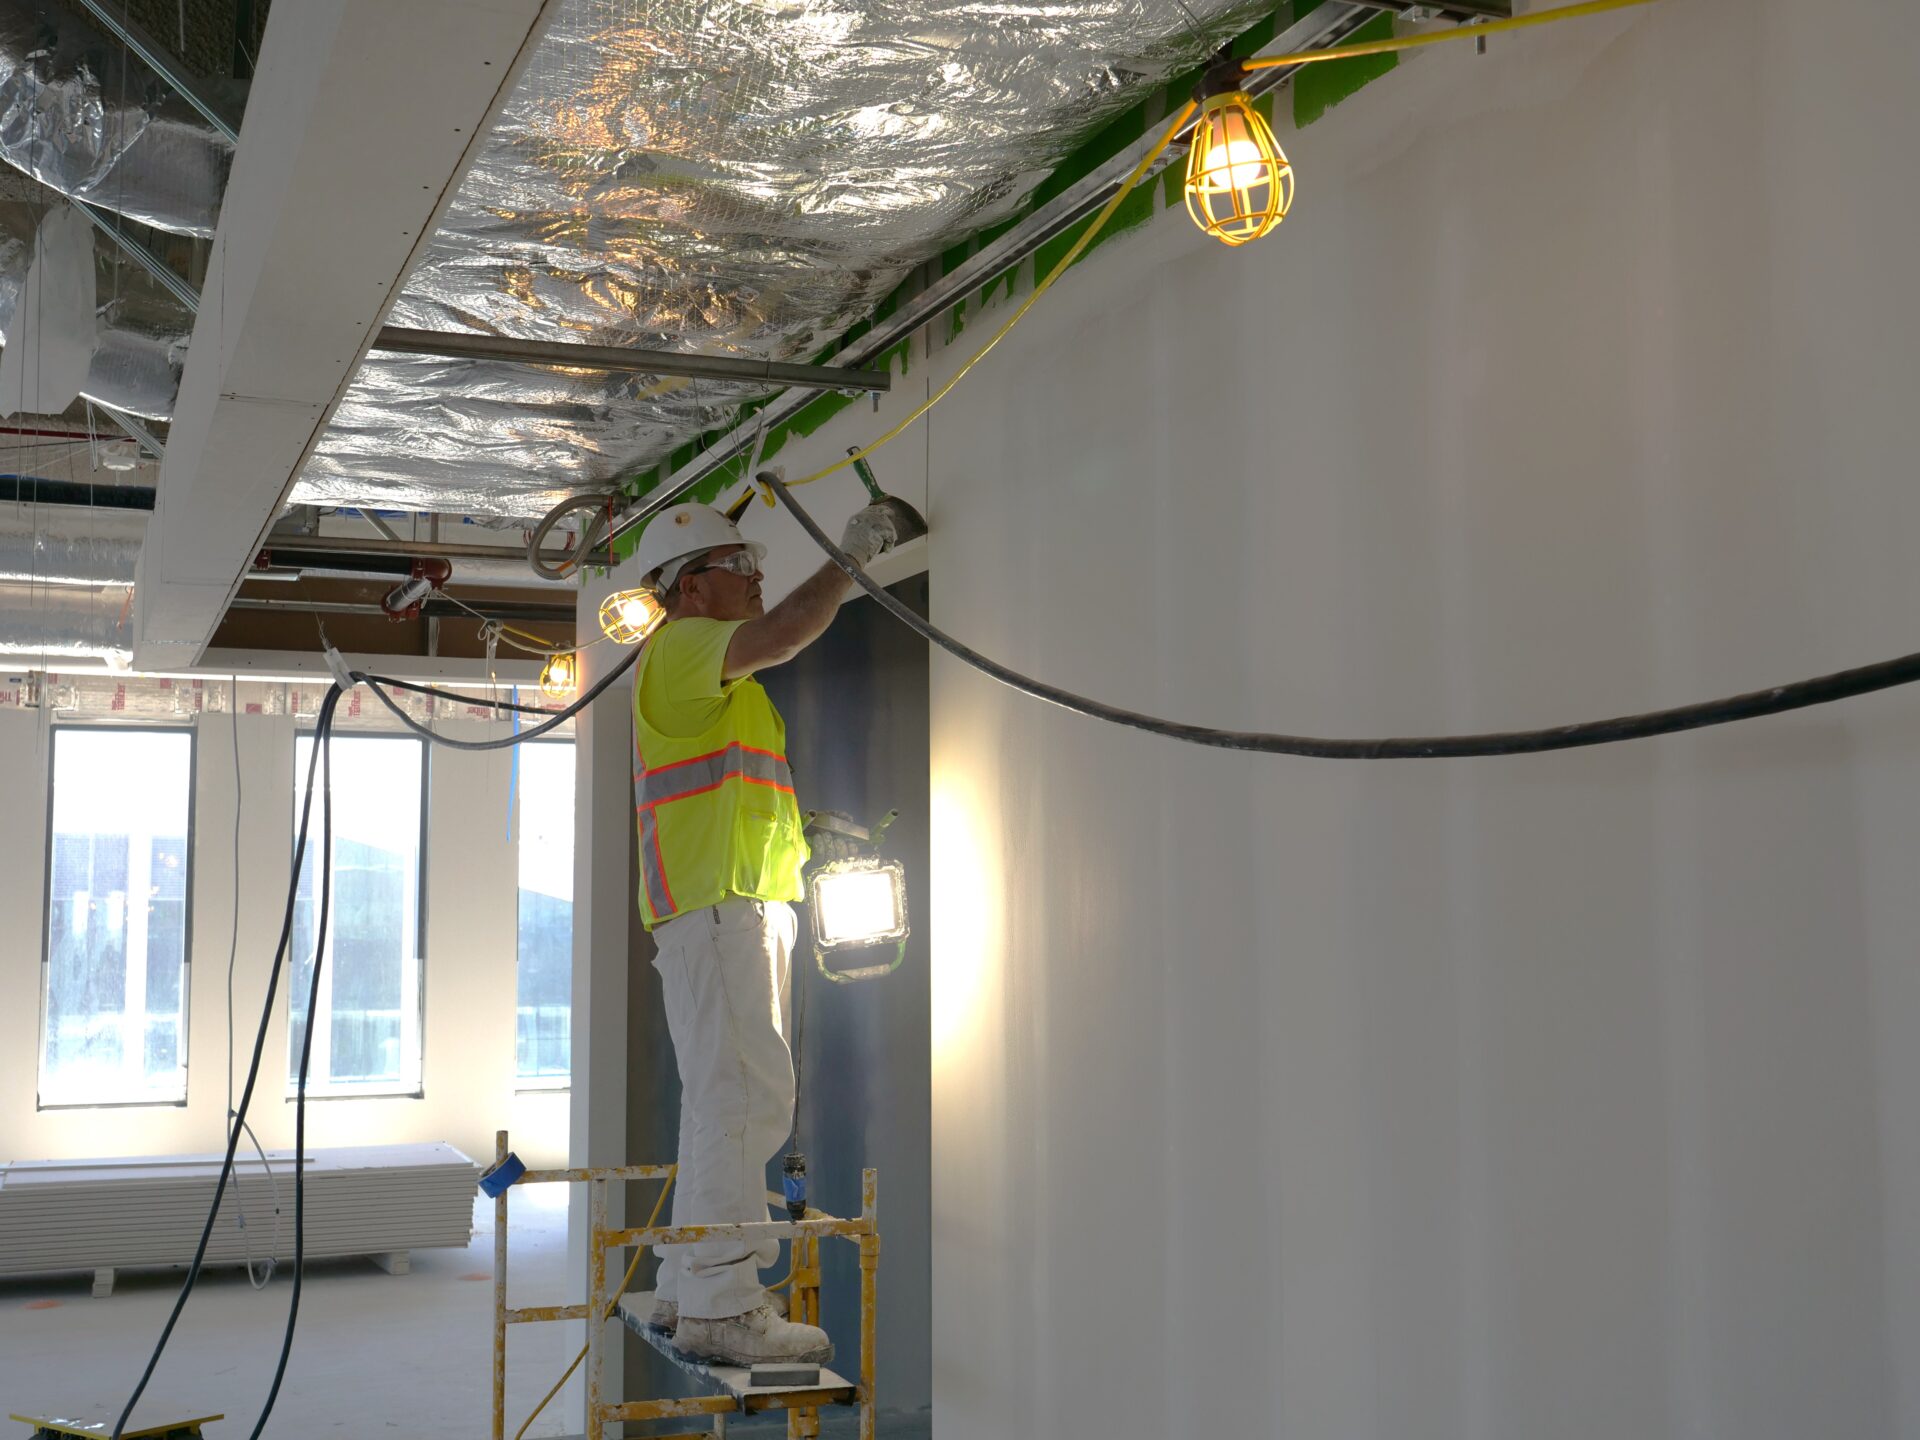 Image from the Gallery: Drywall Finishers 2022